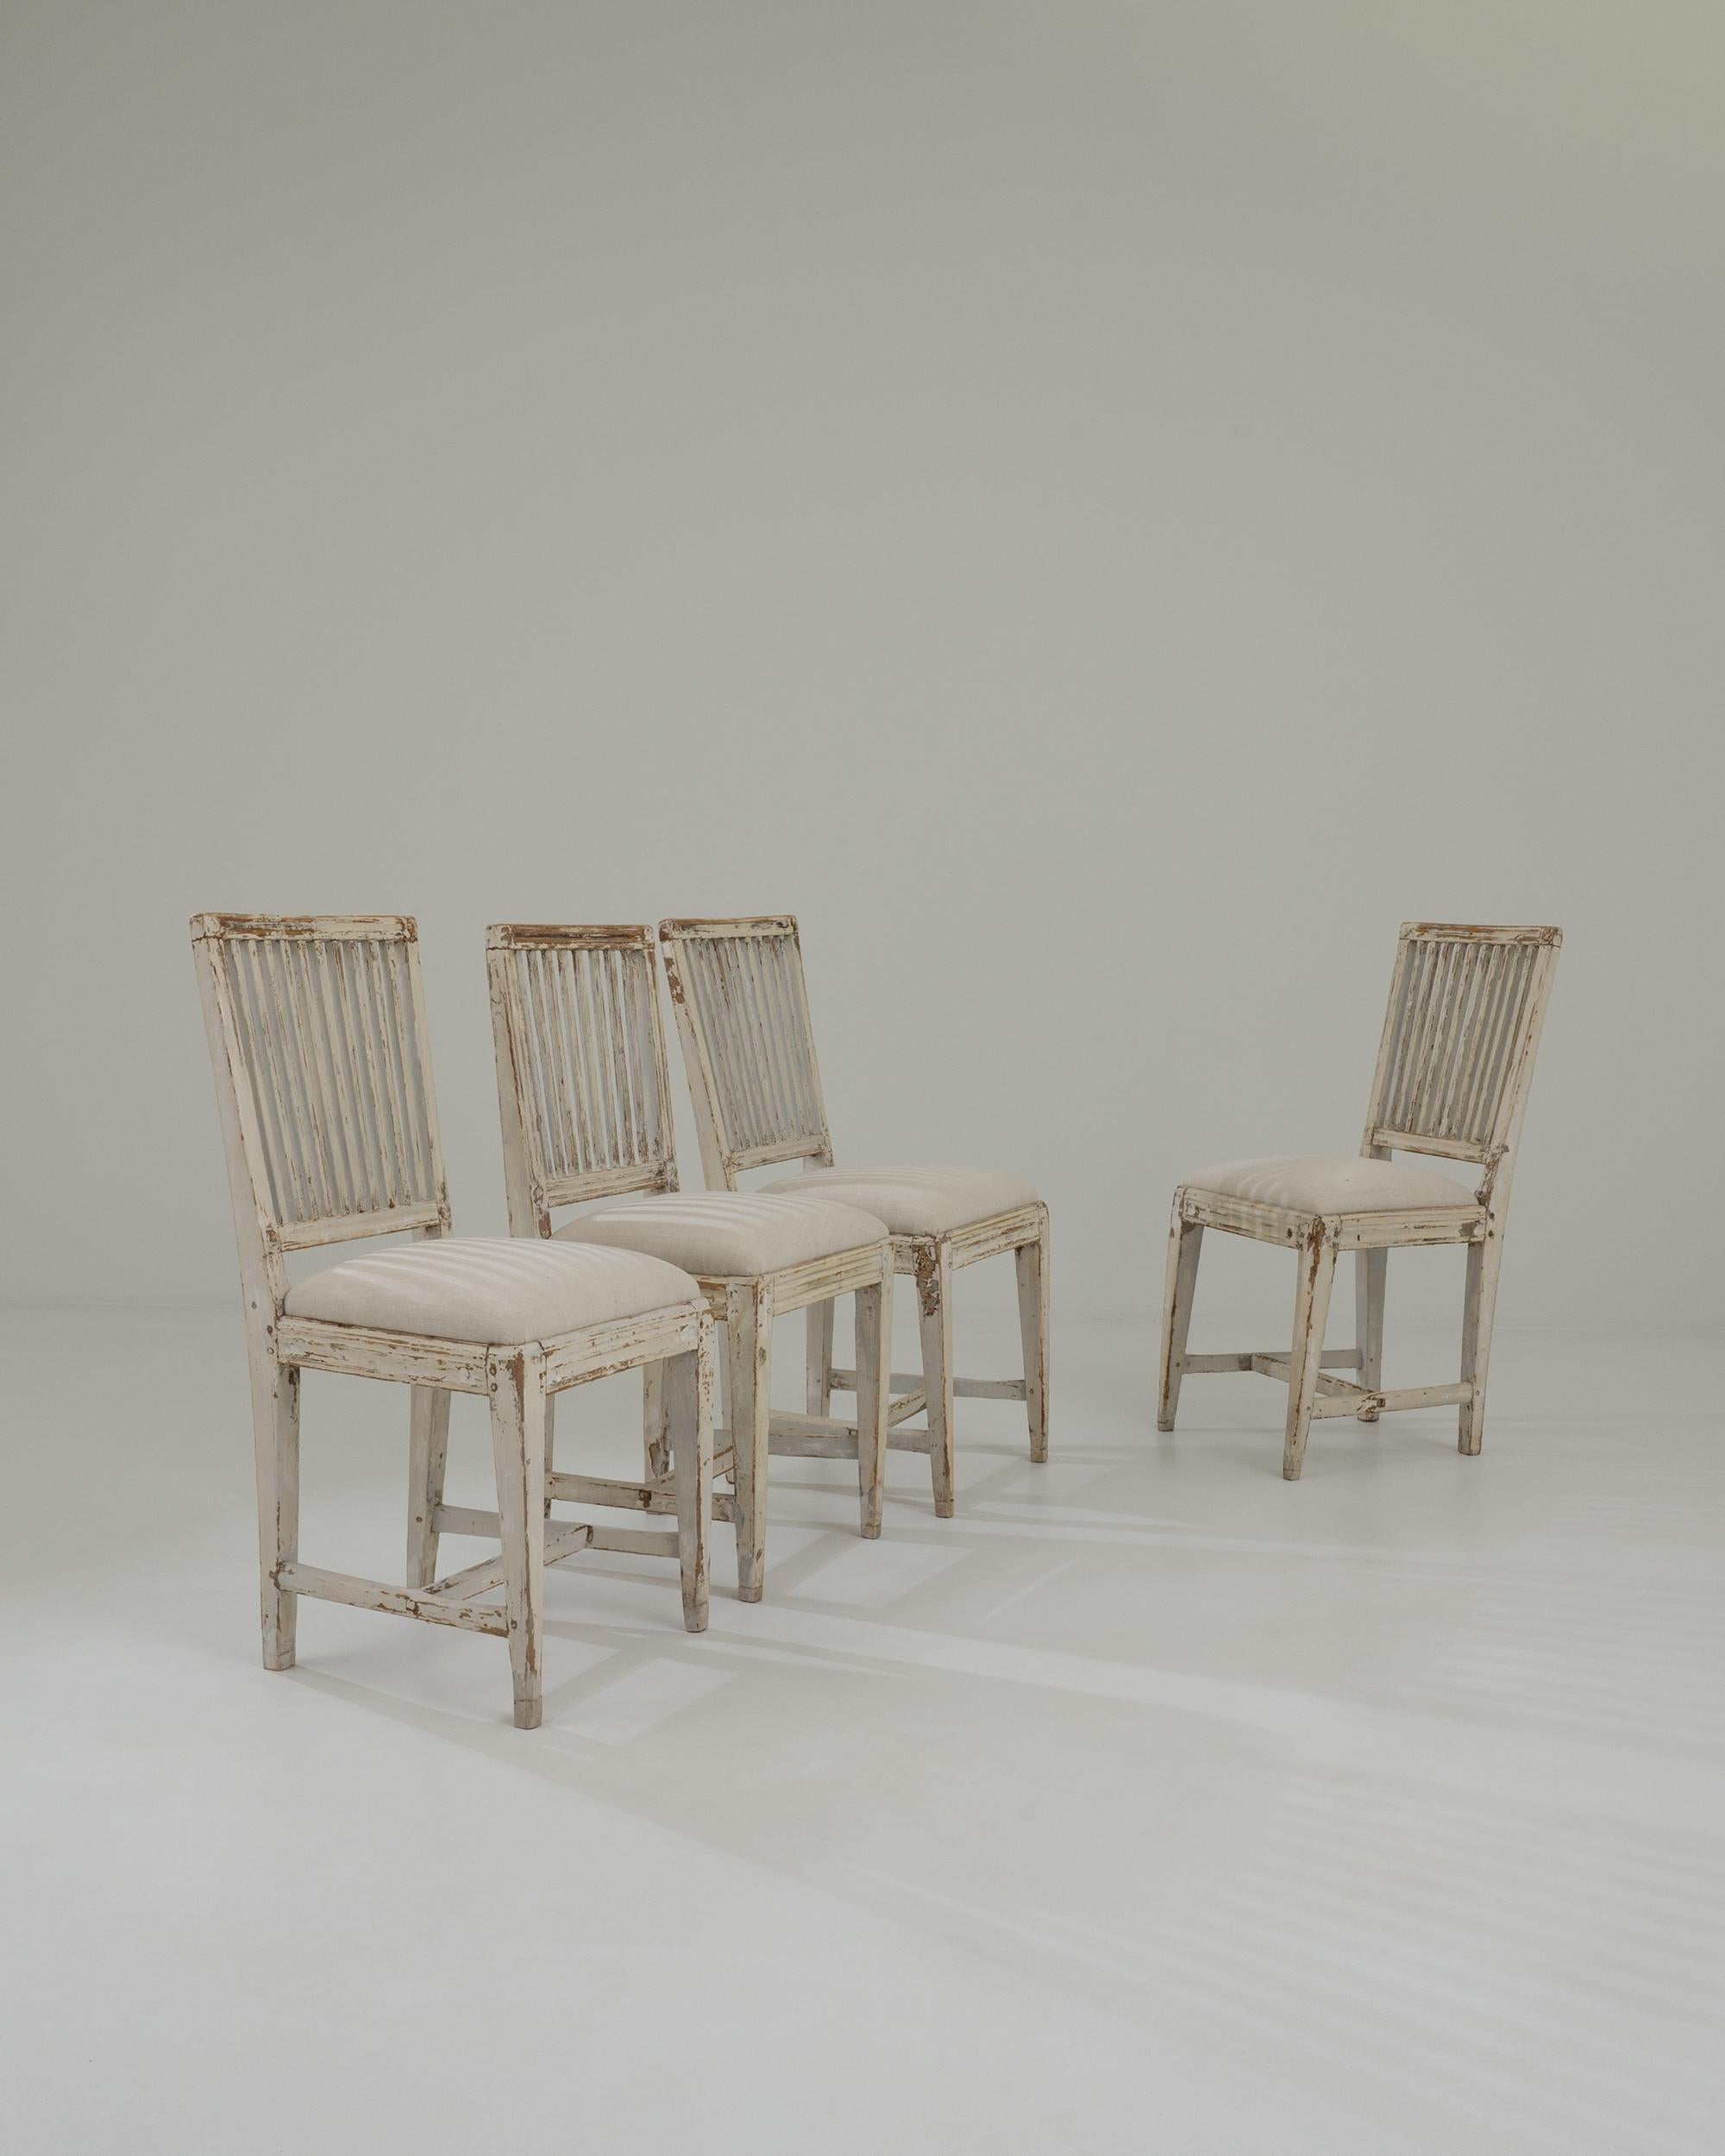 A set of wooden upholstered dining chairs created in 19th century Sweden. Bright and airy, these cheery breathe life into the space, while quietly reminding of their maturity and experience. Created in a classic farmhouse style, each chair gives a